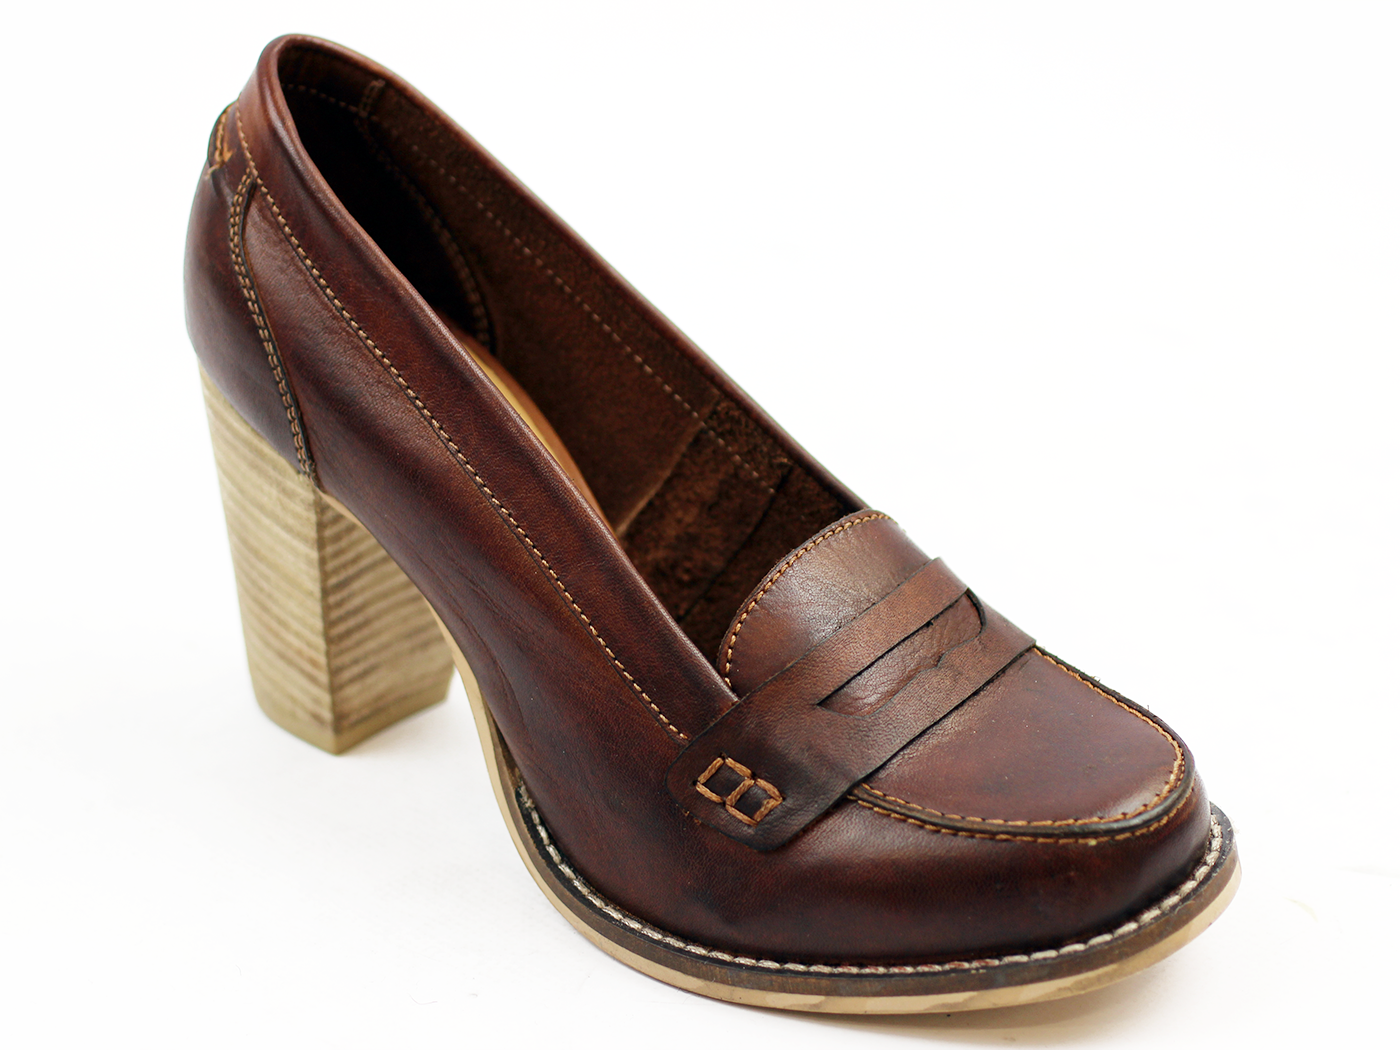 Florida Loafers LACEYS Retro 60s Heeled Loafers T